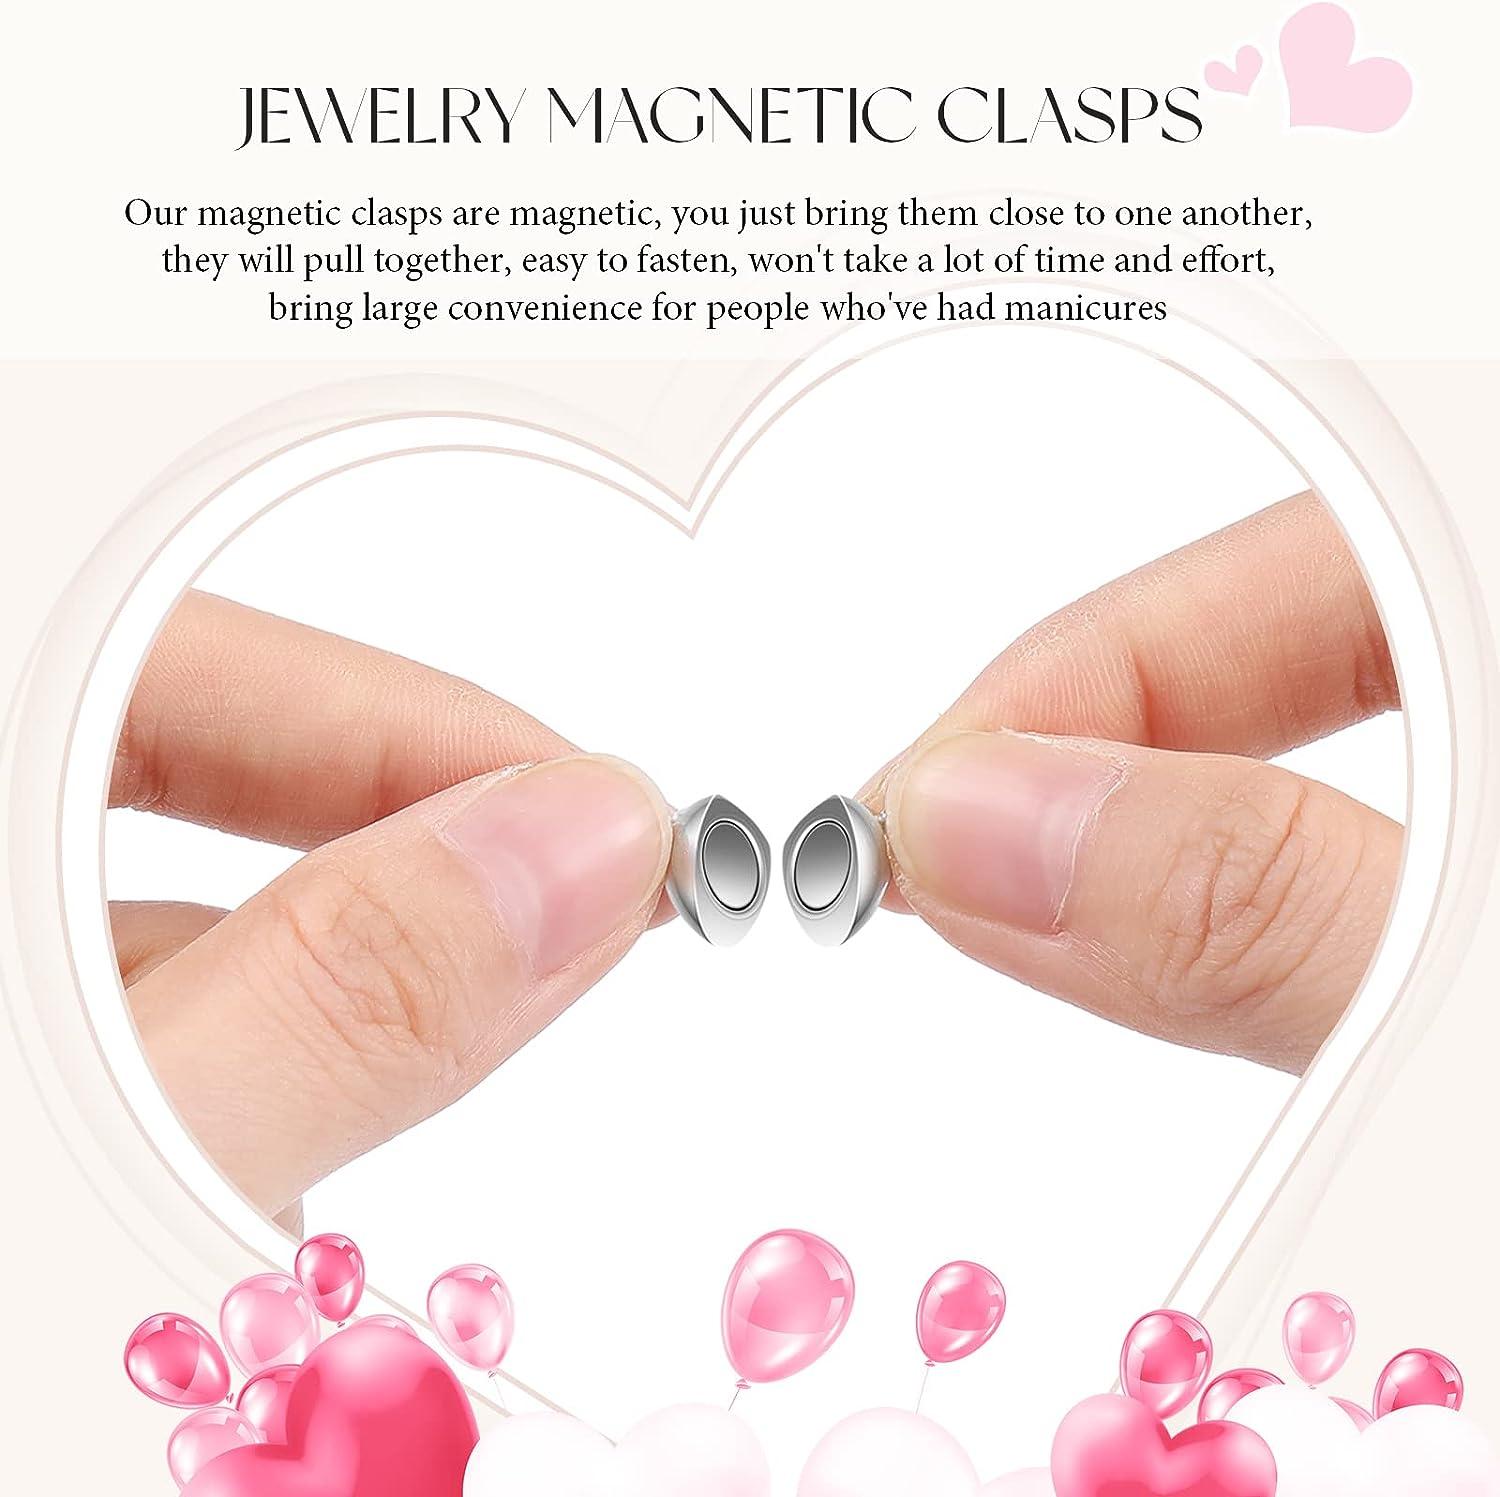 24 Piece Magnetic Clasps for Jewelry Locking India